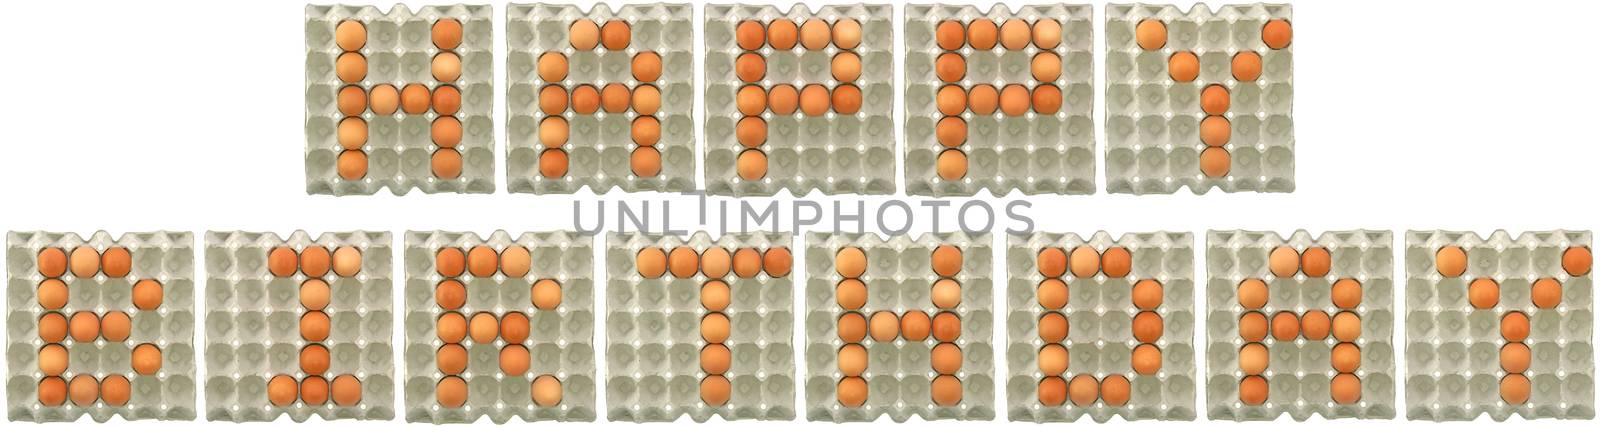 HAPPY BIRTHDAY word from eggs in paper tray for food or celebrate concept